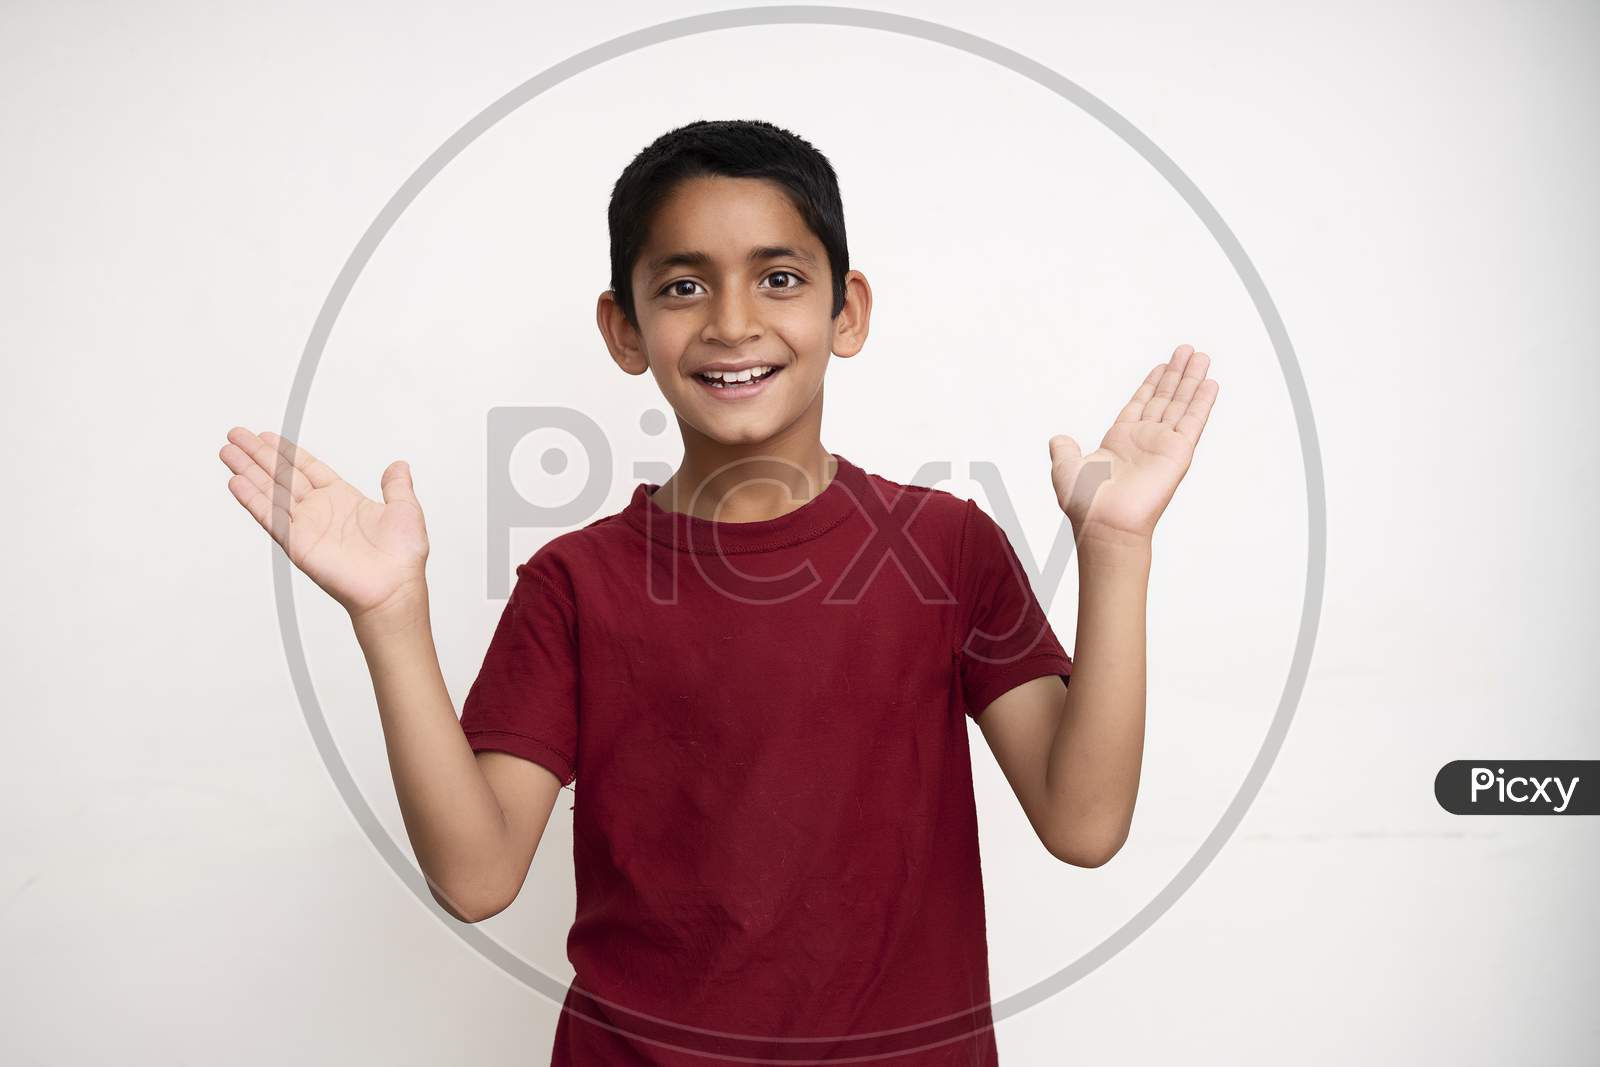 Young Indian Kid Acting Happy With His Arms Spread While Standing On A White Wall With Copy Space. Education And Fun Concept.